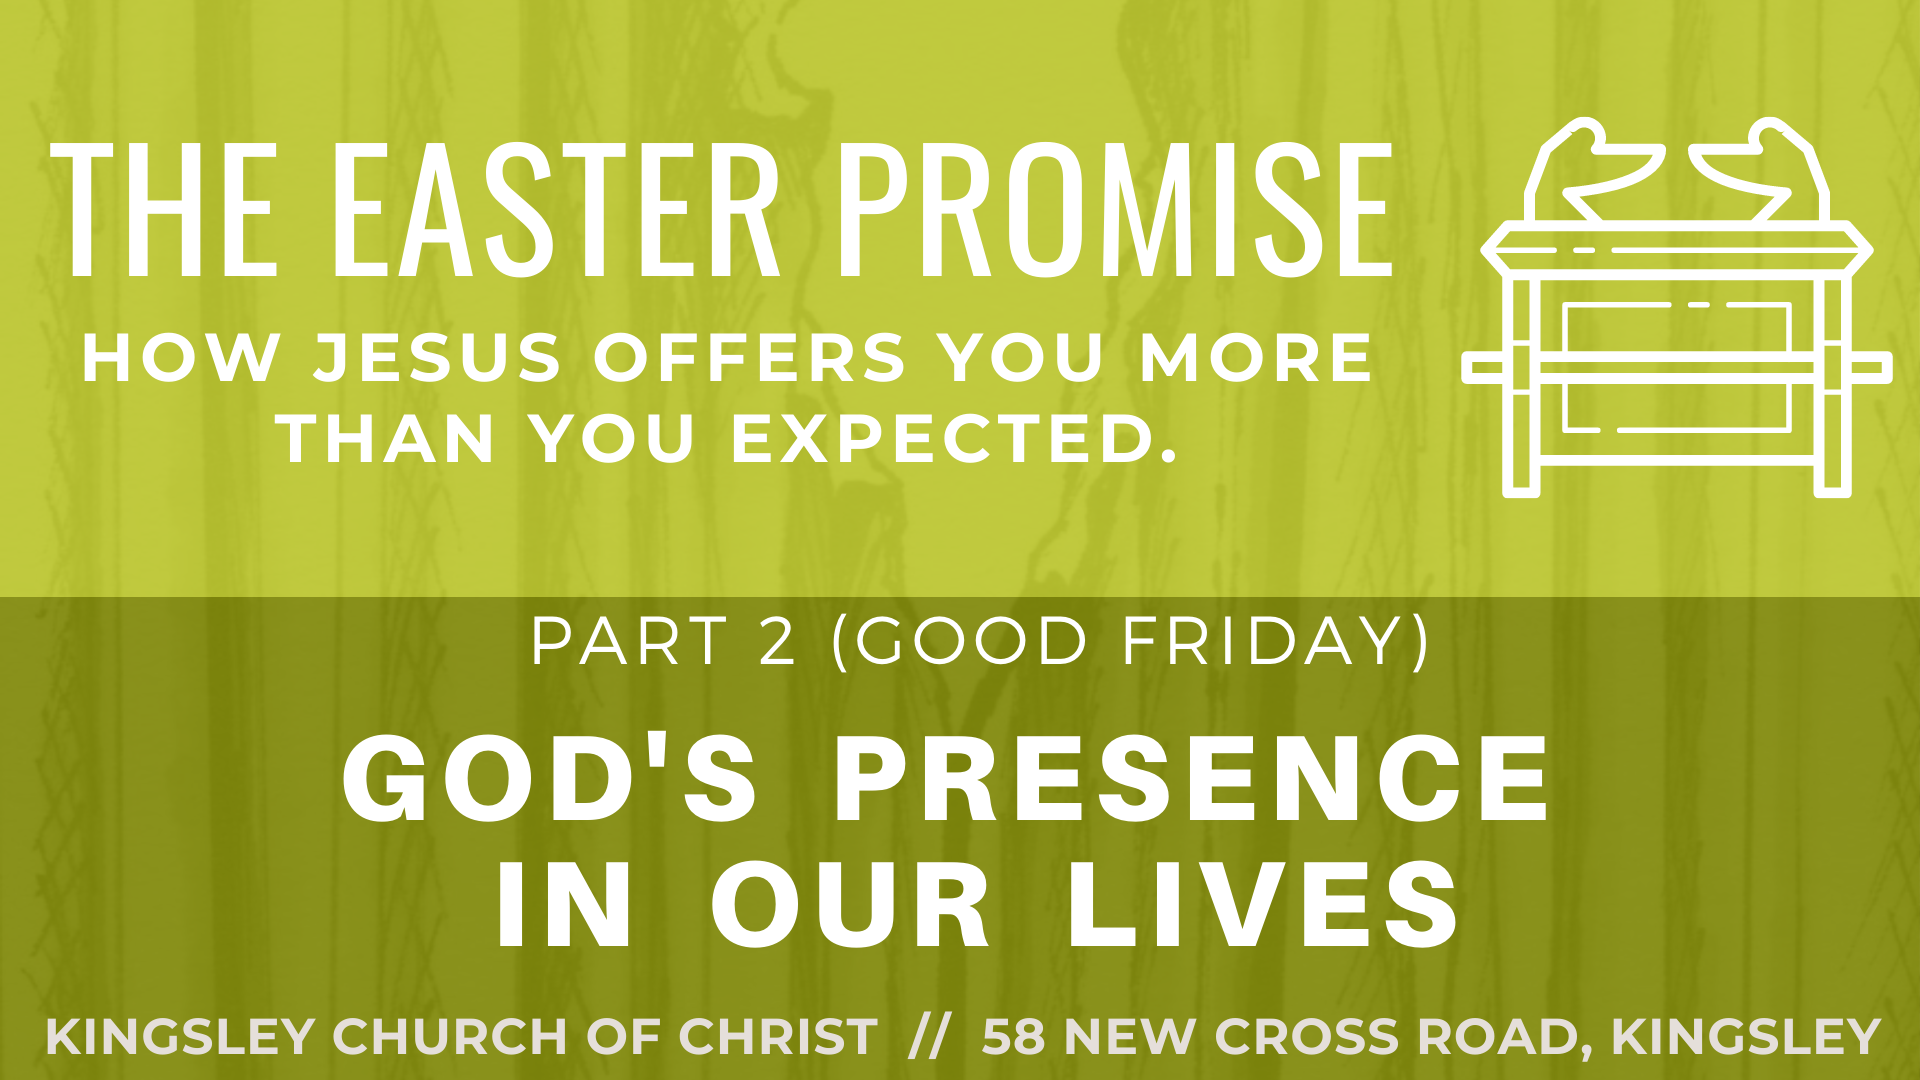 The Easter Promise pt 2 - God's Presence in our Lives